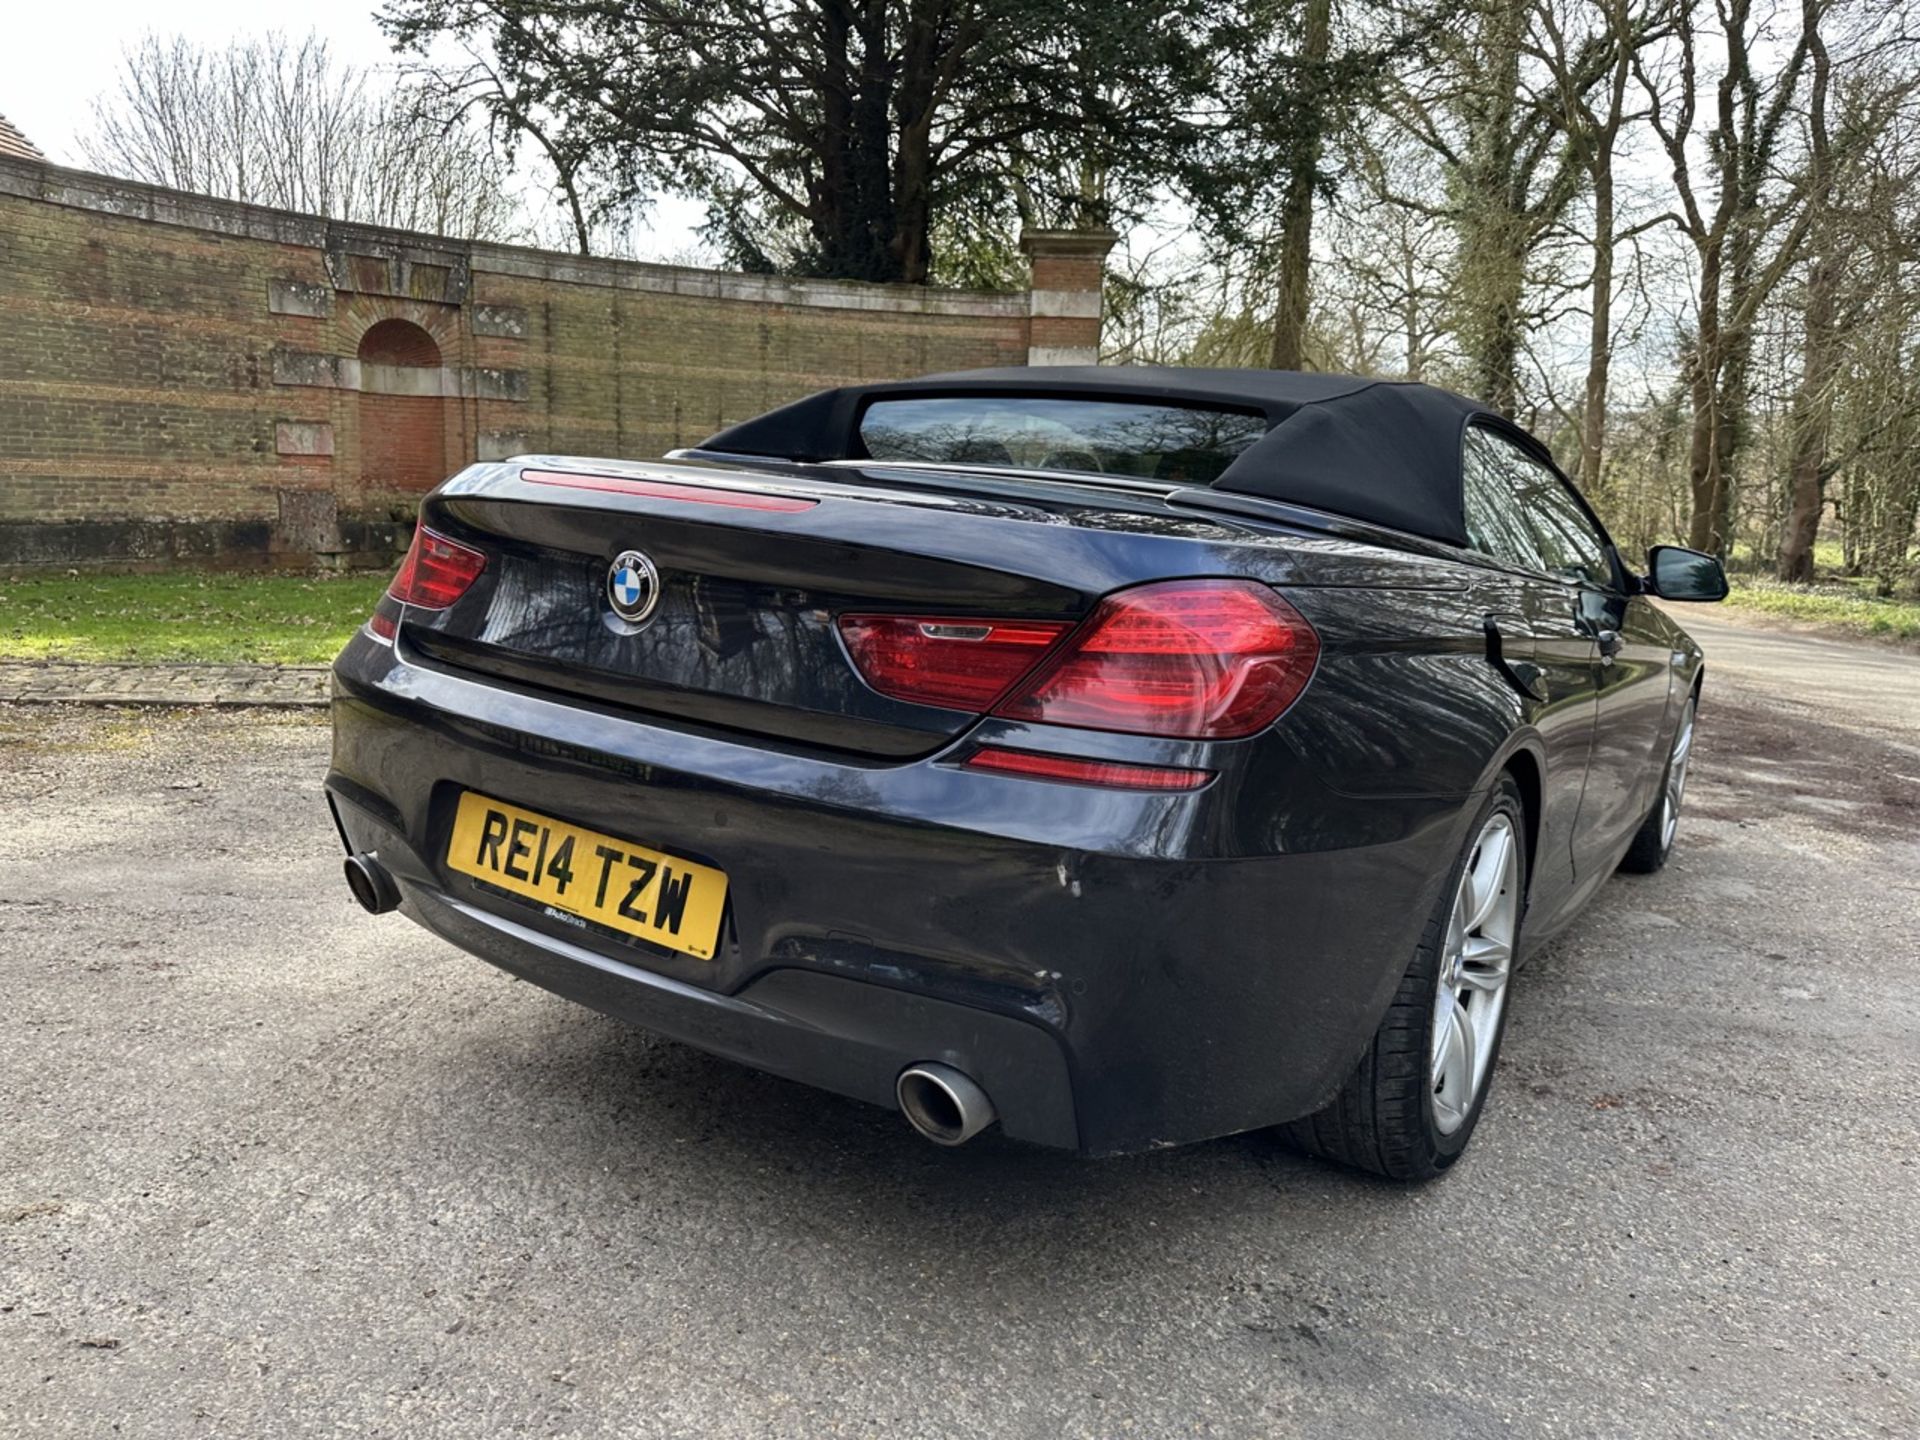 (RESERVE MET) BMW 6 SERIES 640d (M SPORT) Ultimate Summer Car - AUTOMATIC - Convertible - 2014 - Image 5 of 22